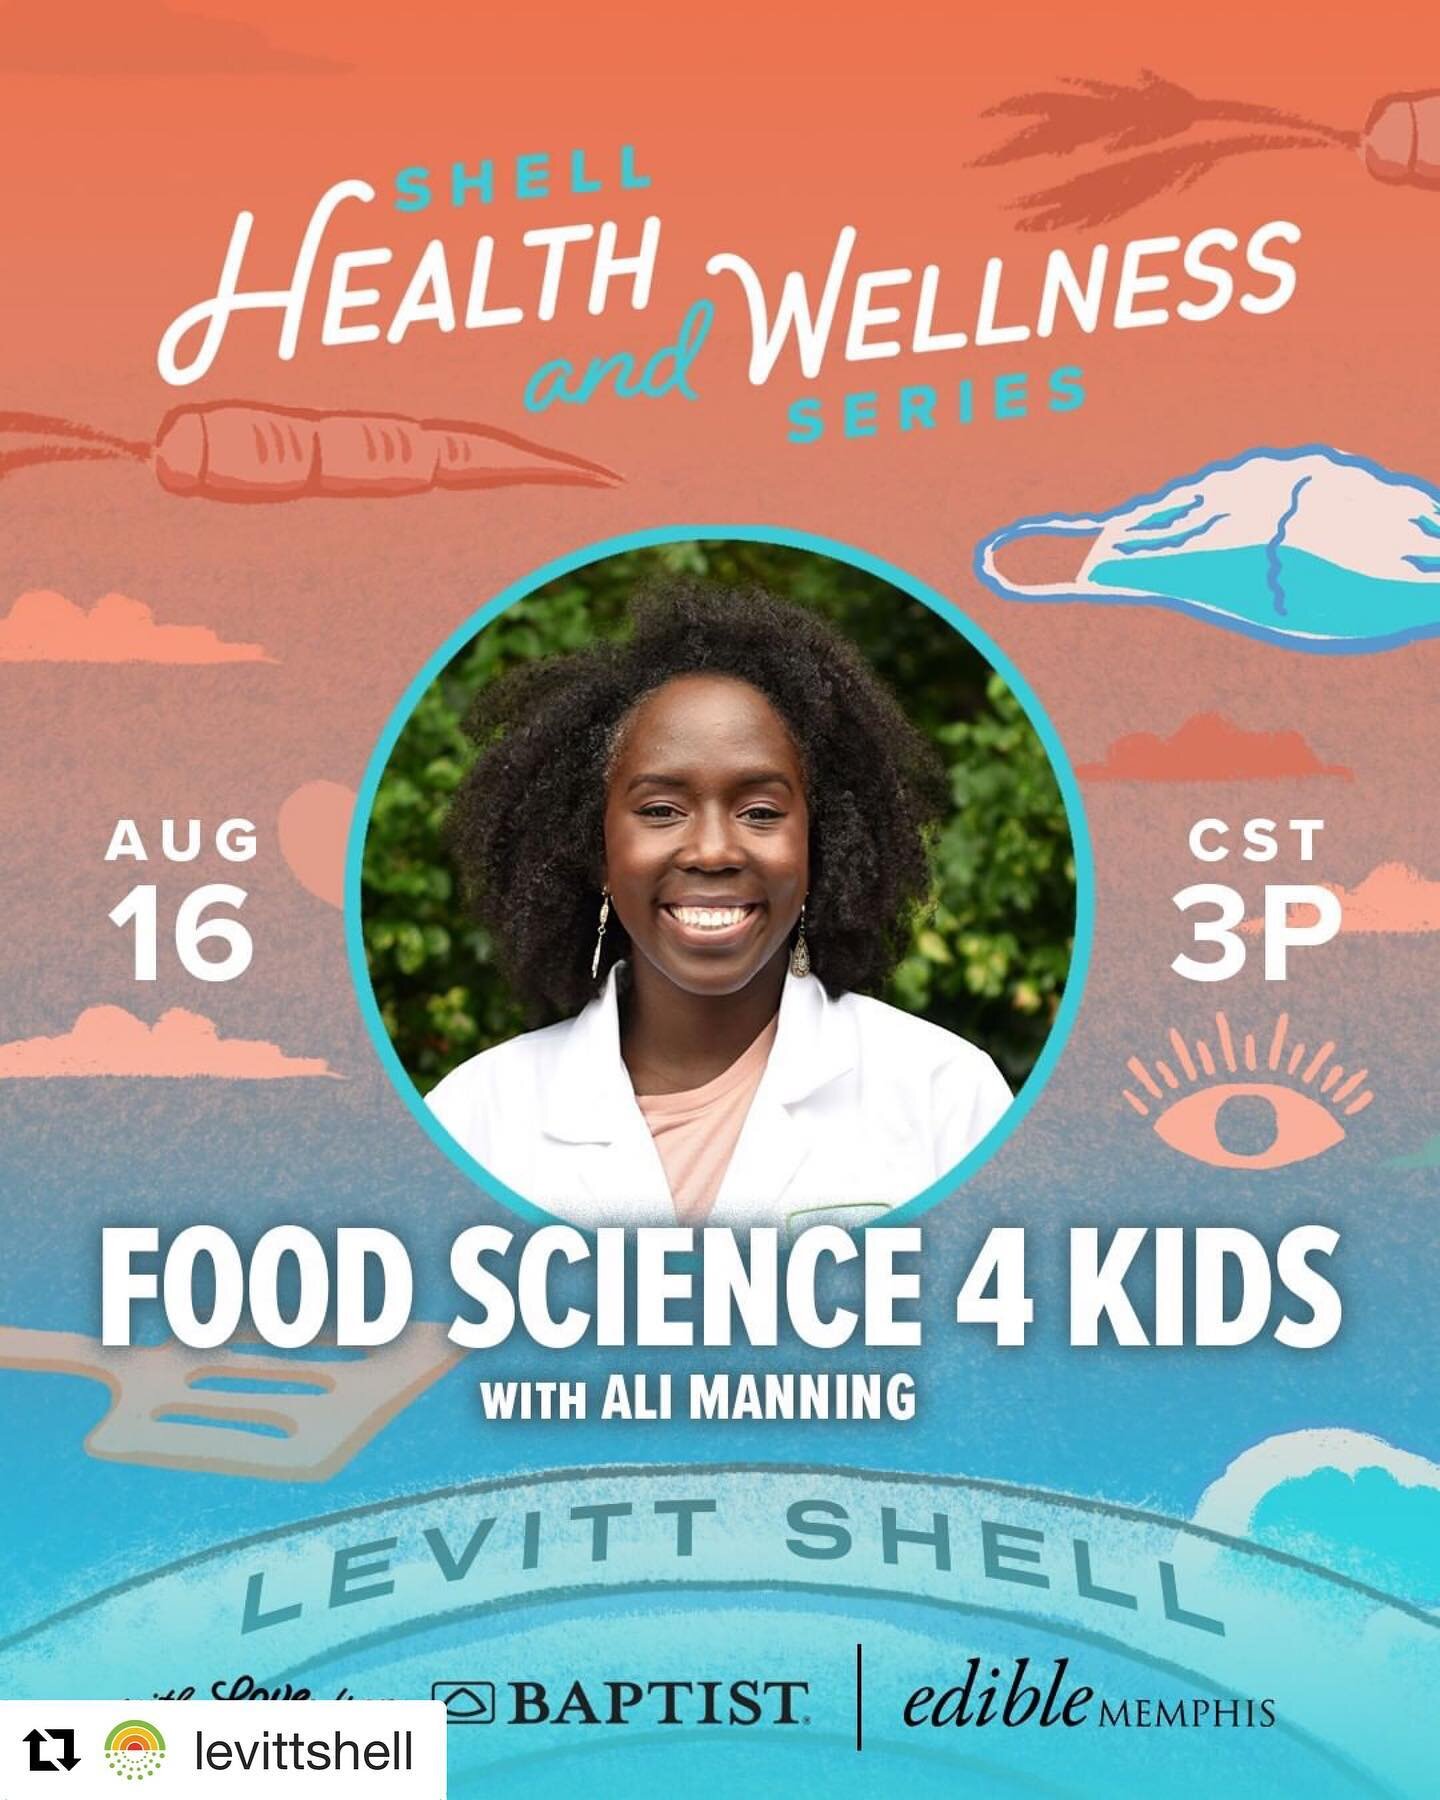 #Repost @levittshell with @get_repost
・・・
Ali Manning is the creator of Food Science 4 Kids, a virtual learning program for children ages 5-10. Every Tuesday she teaches food science basics and conducts exciting experiments to students from all over 